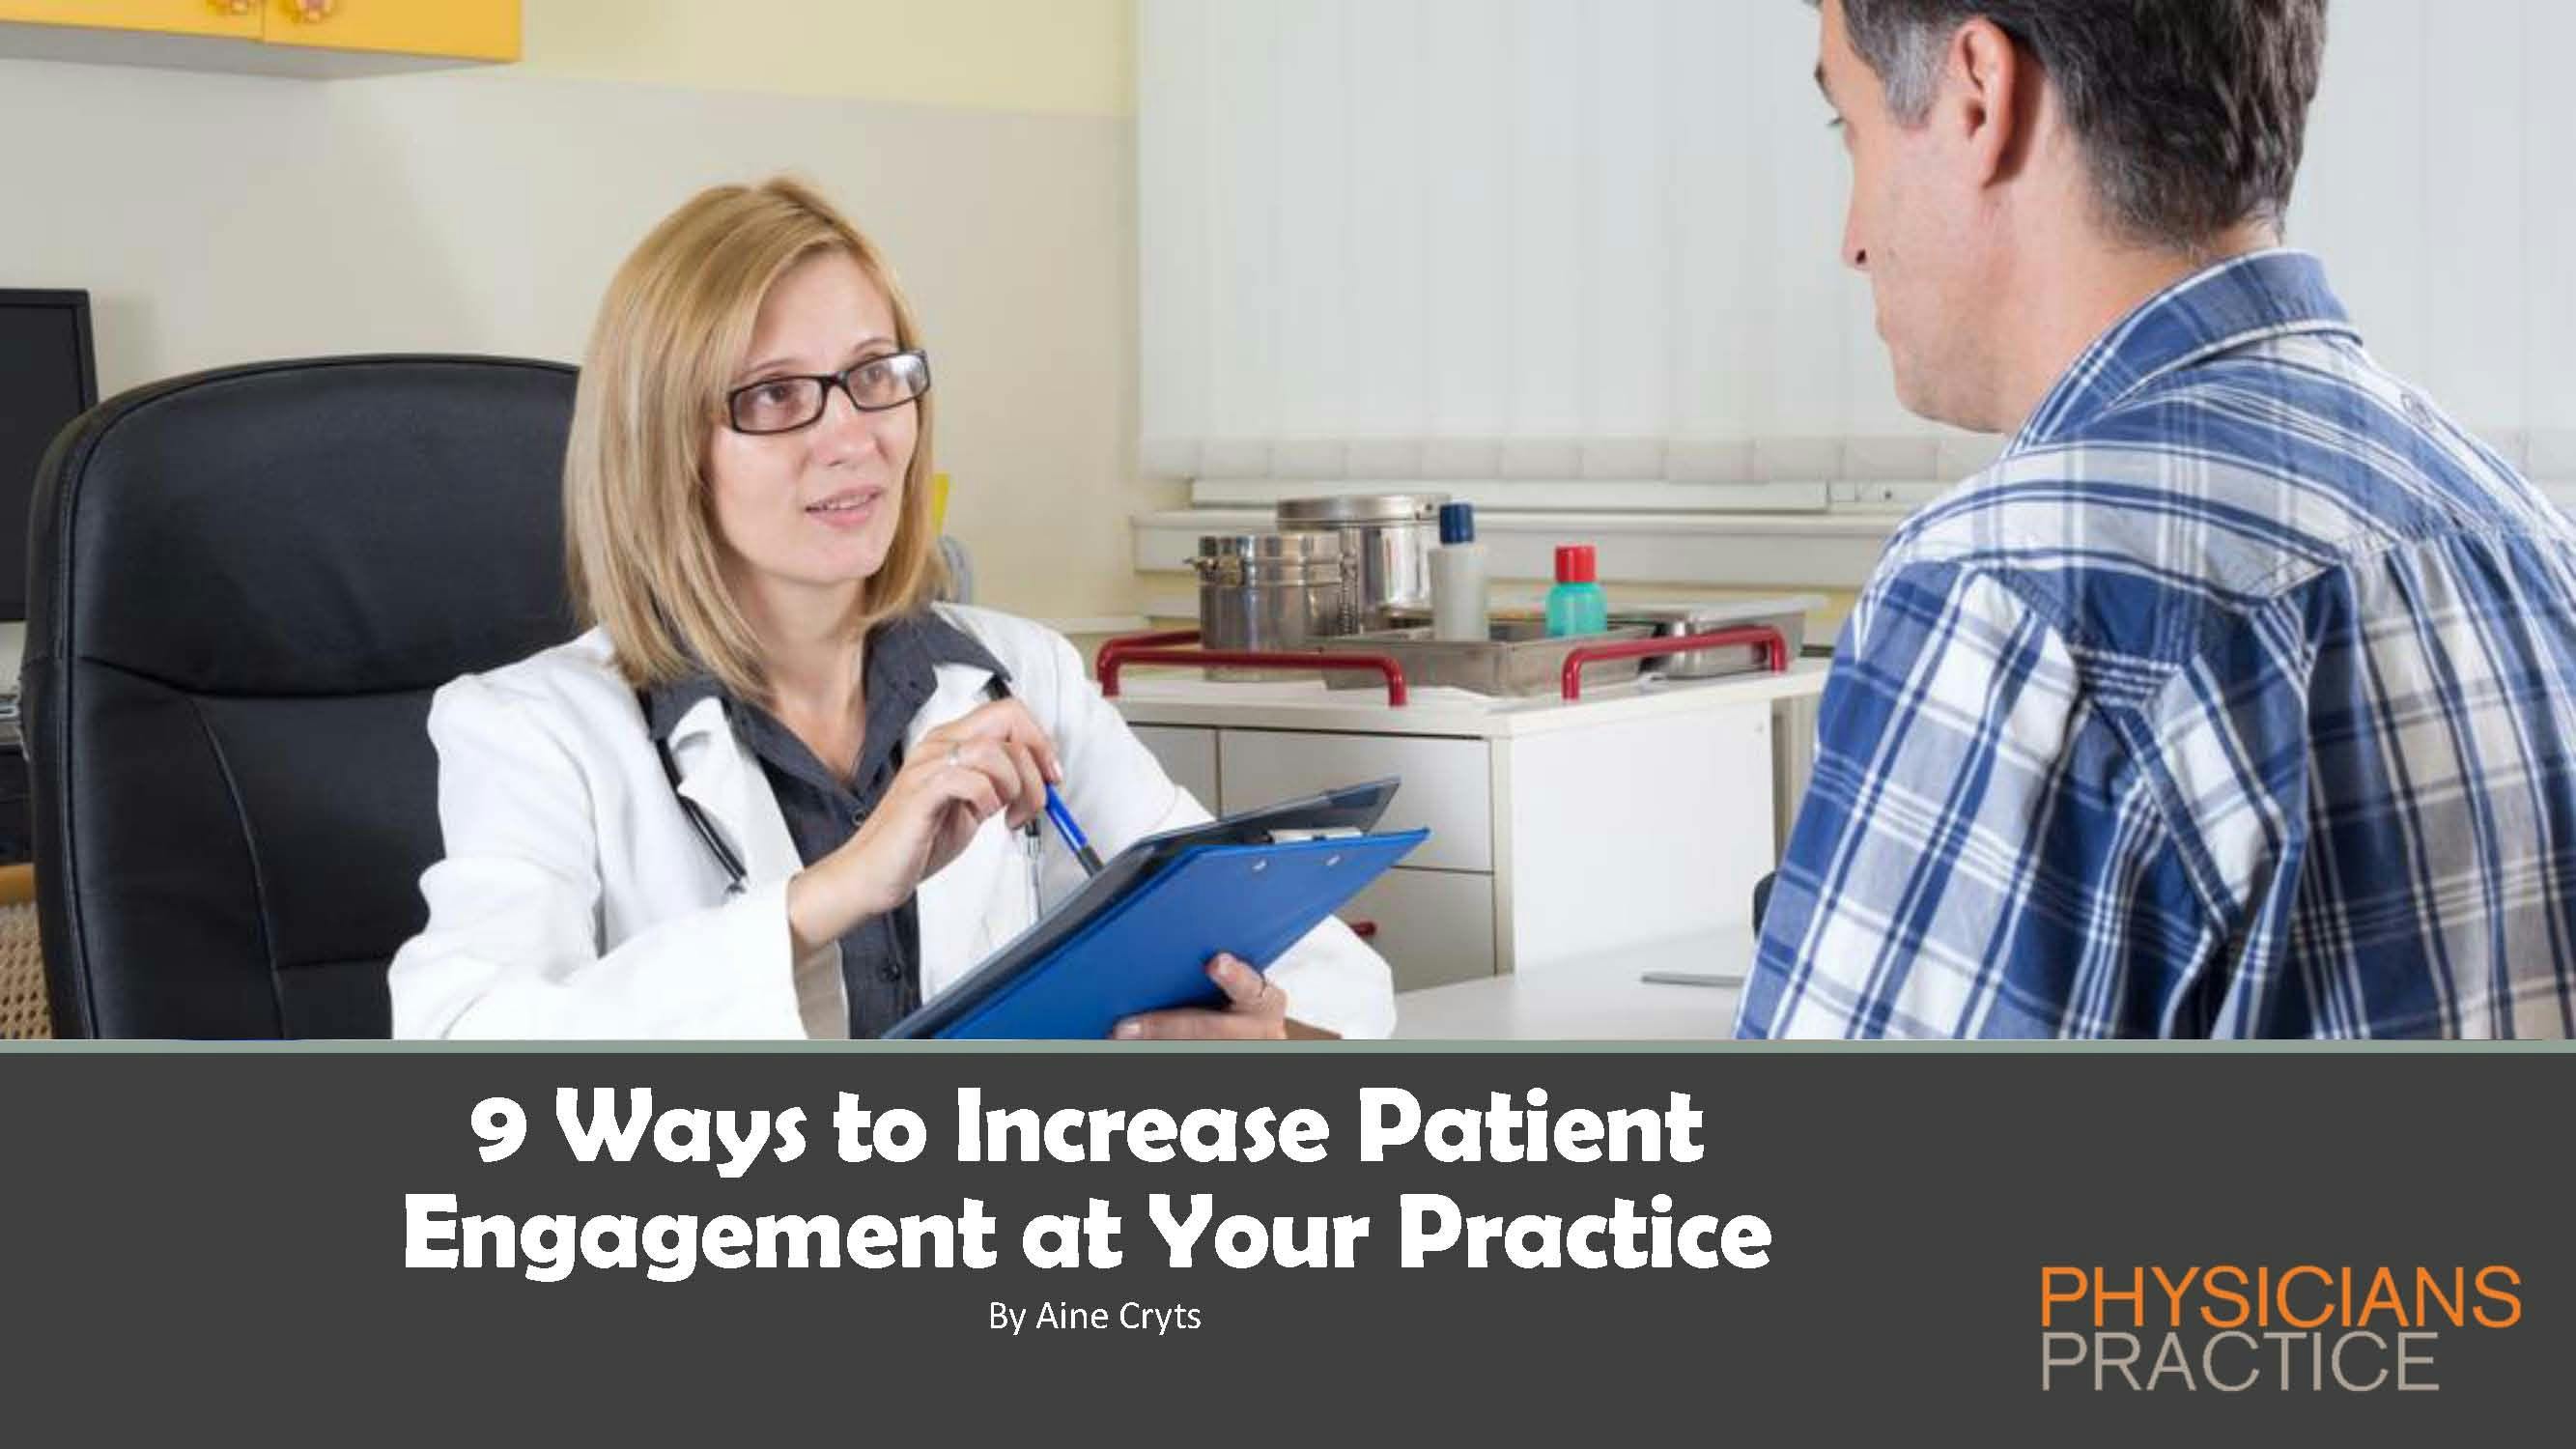 9 Ways to Increase Patient Engagement at Your Practice